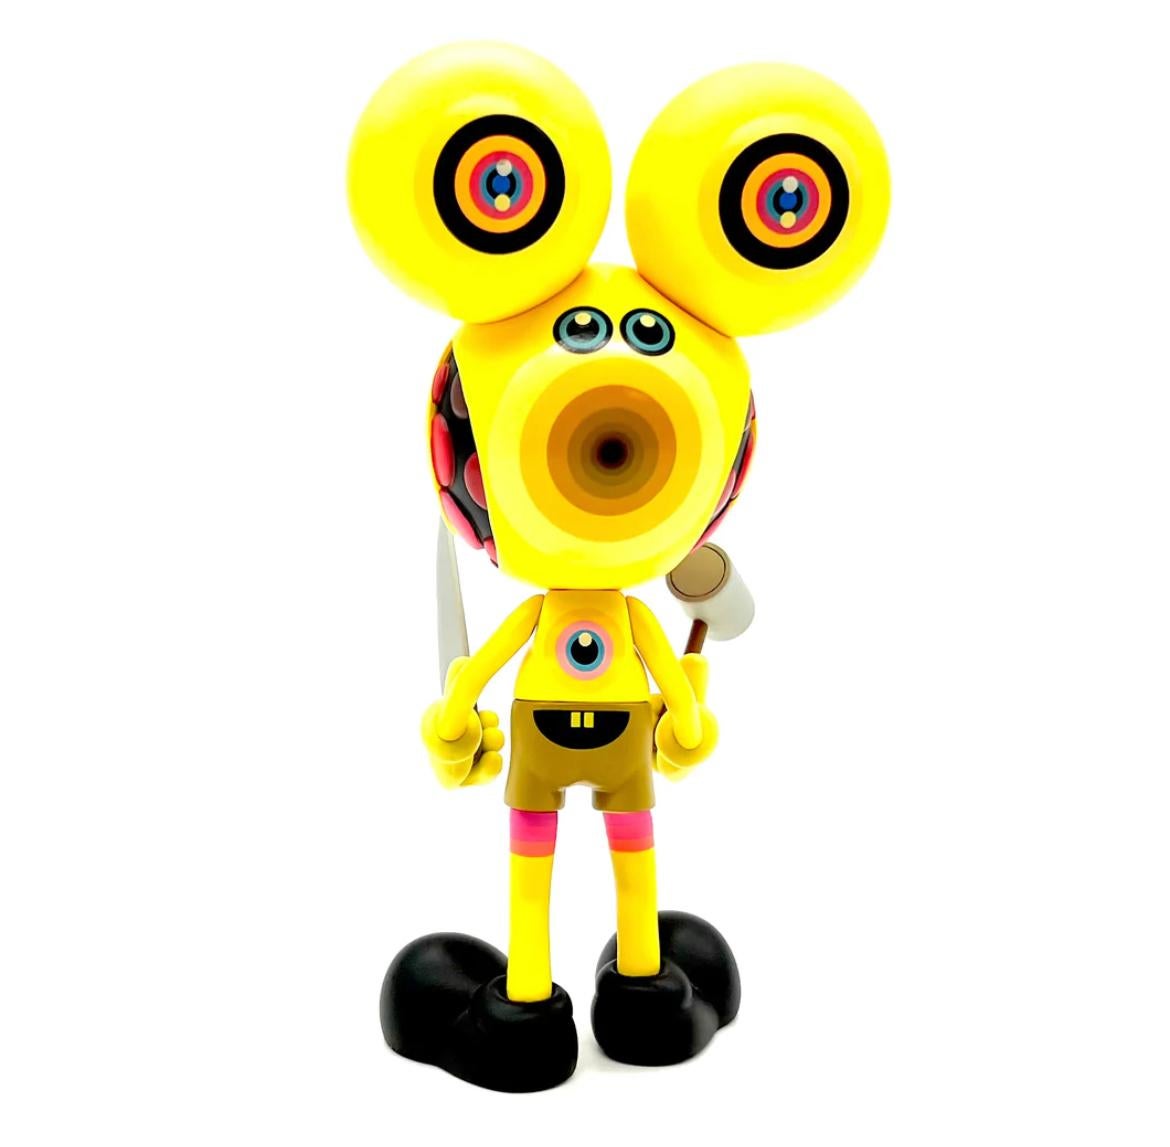 Spacemonkey Toy Series 2 (Happy Pants Yellow) Ed. 20/120 - Sculpture by Dalek